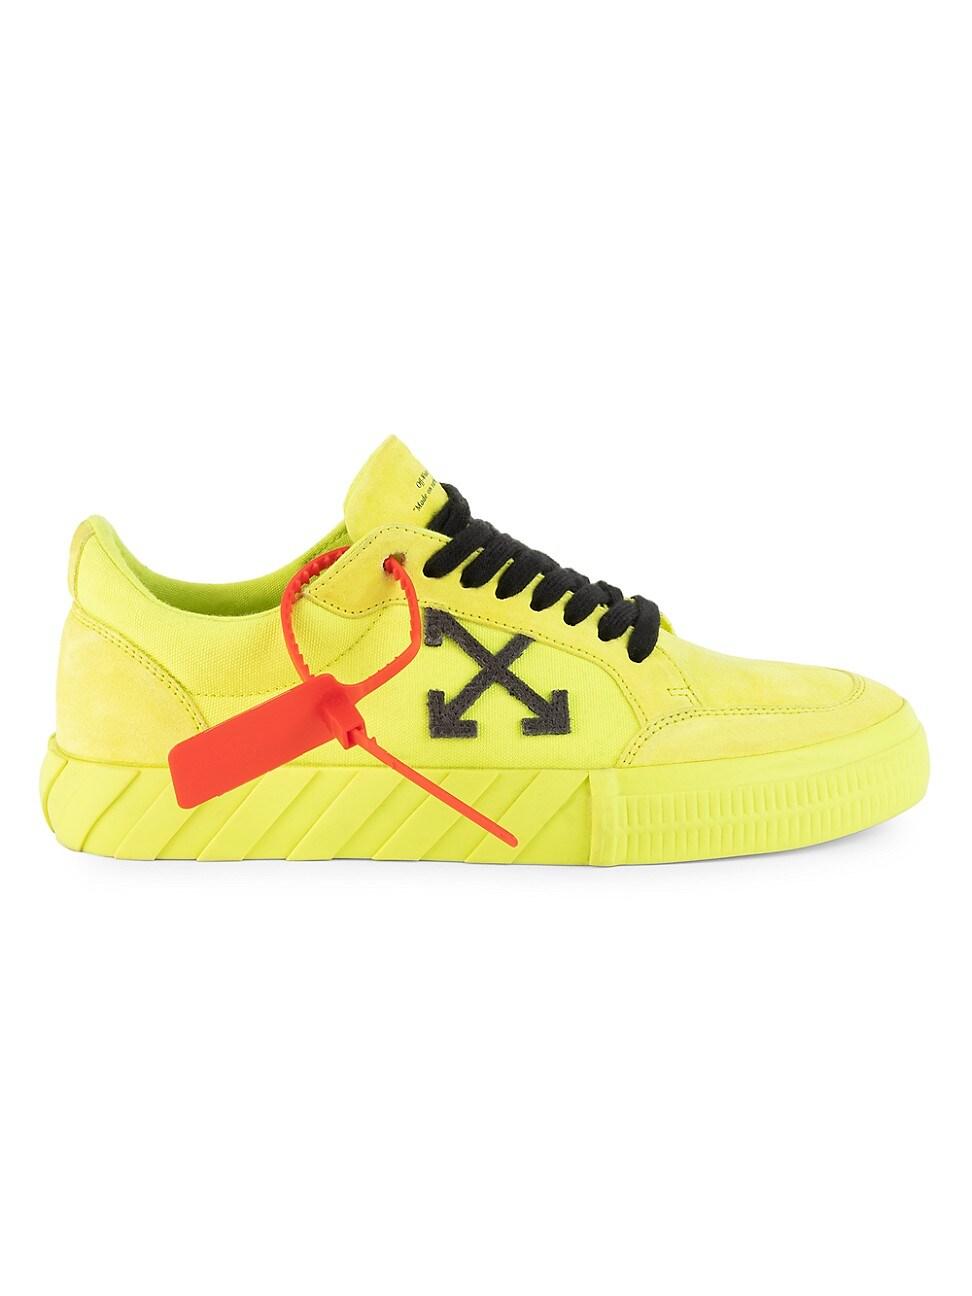 Off-White c/o Virgil Abloh Low Vulcanized Fluorescent Leather Sneakers in  Black,Yellow (Yellow) for Men - Save 67% - Lyst